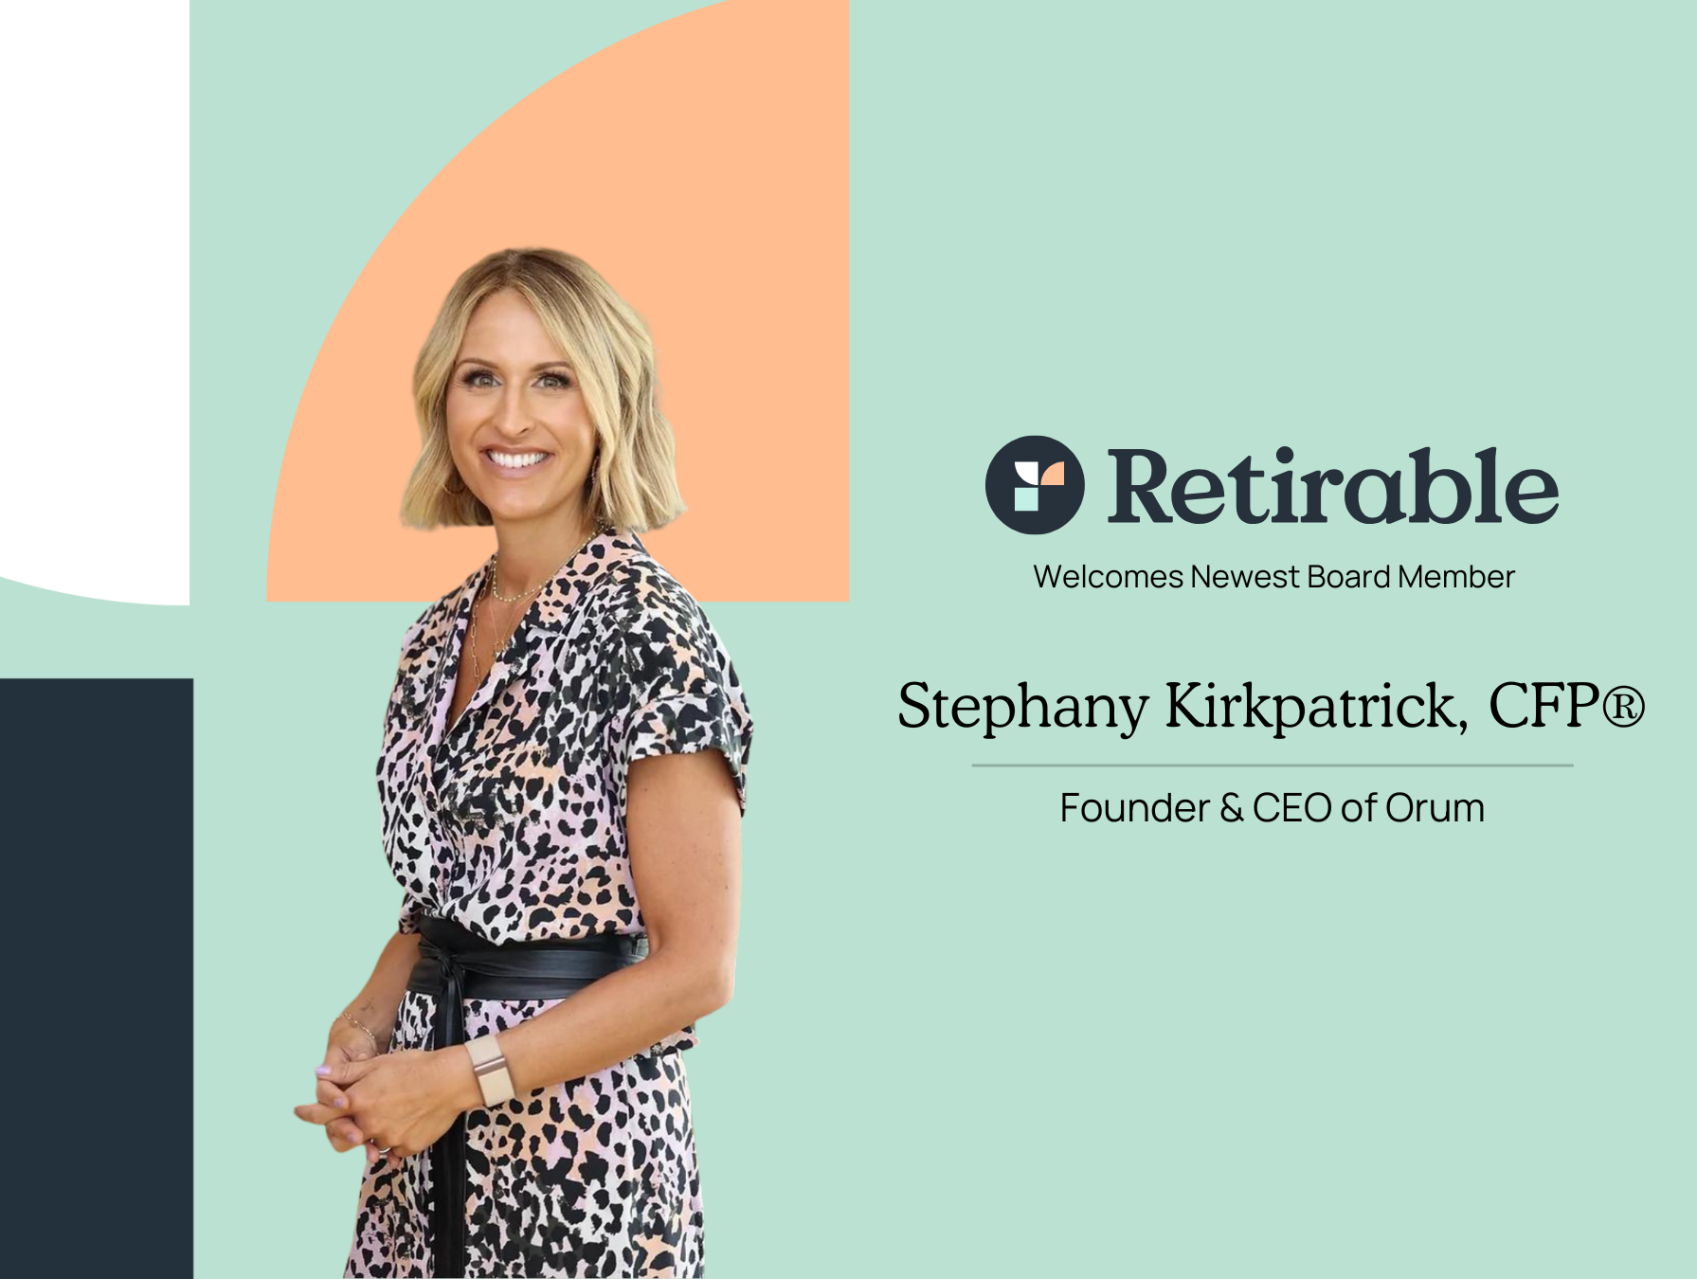 Stephany Kirkpatrick, Founder & CEO of Orum, Joins the Retirable Board